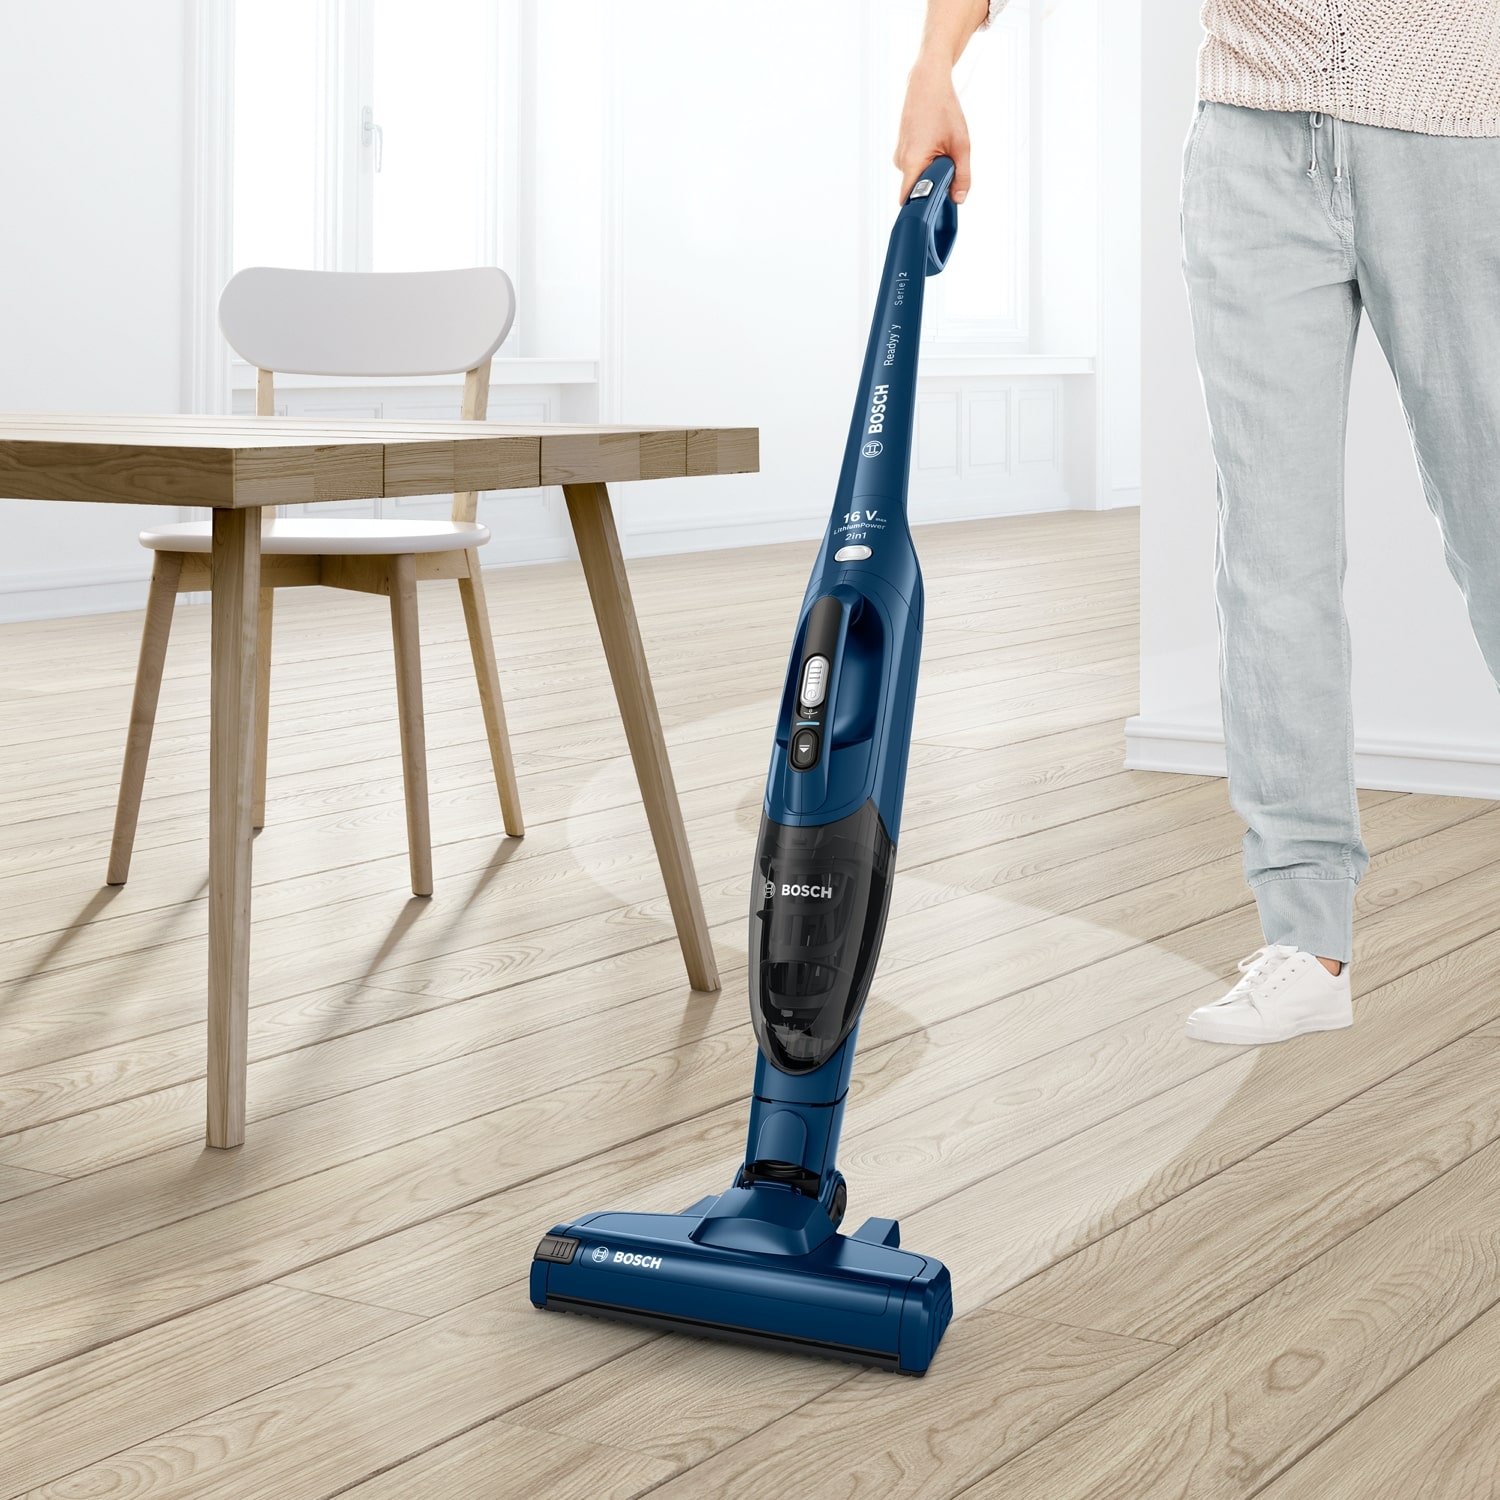 Bosch BCHF216GB Readyy'y Serie 2 ProClean Cordless Vacuum Cleaner - 40 Minute Run Time - 7